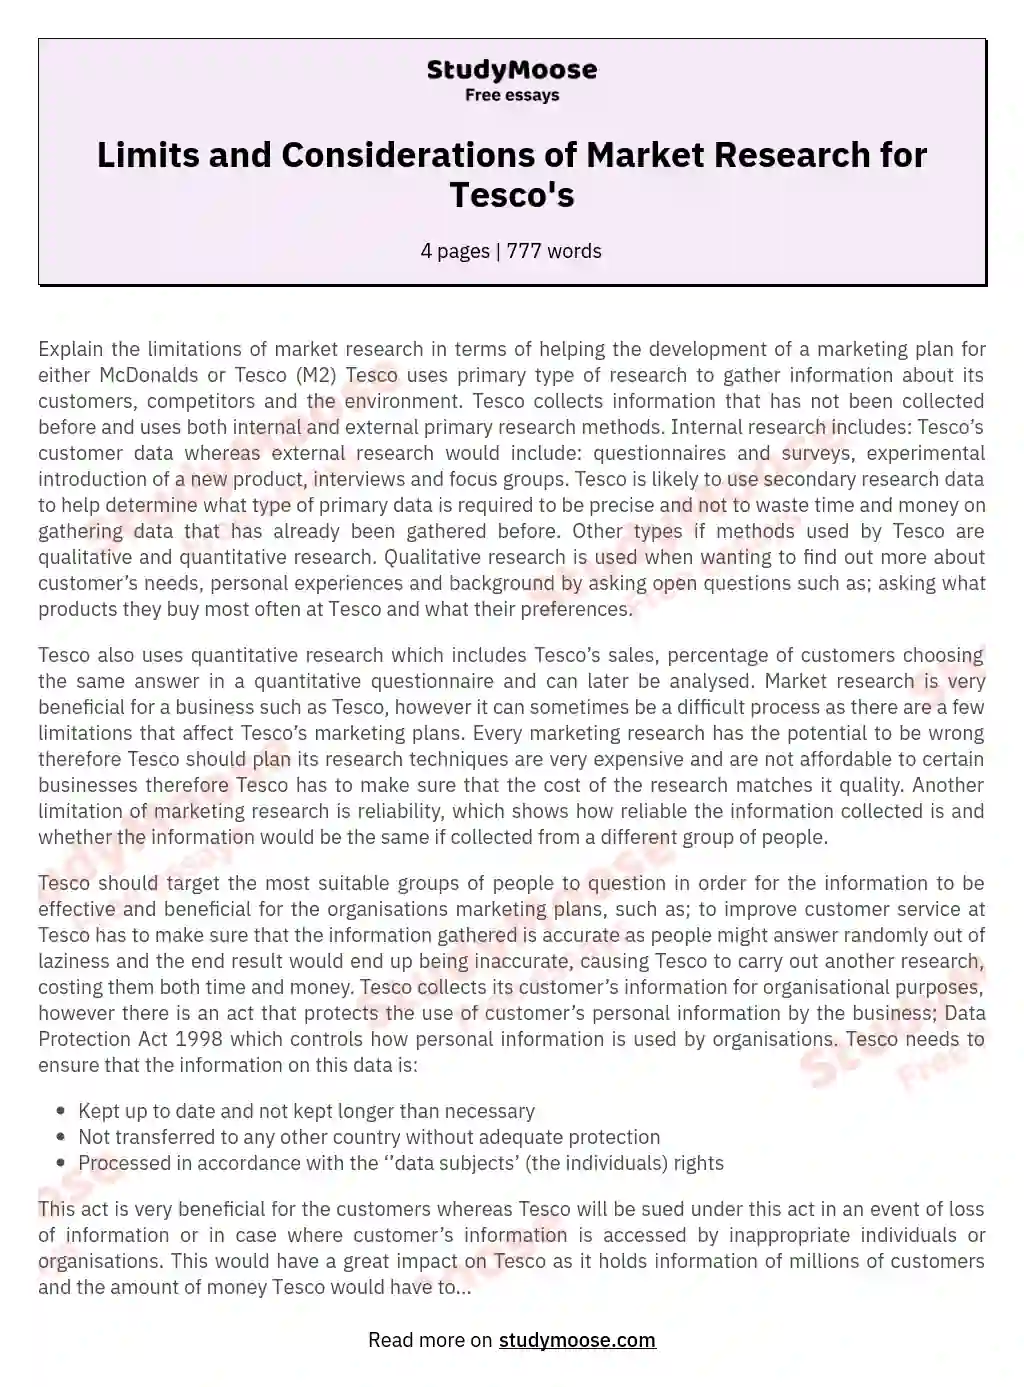 Limits and Considerations of Market Research for Tesco's essay